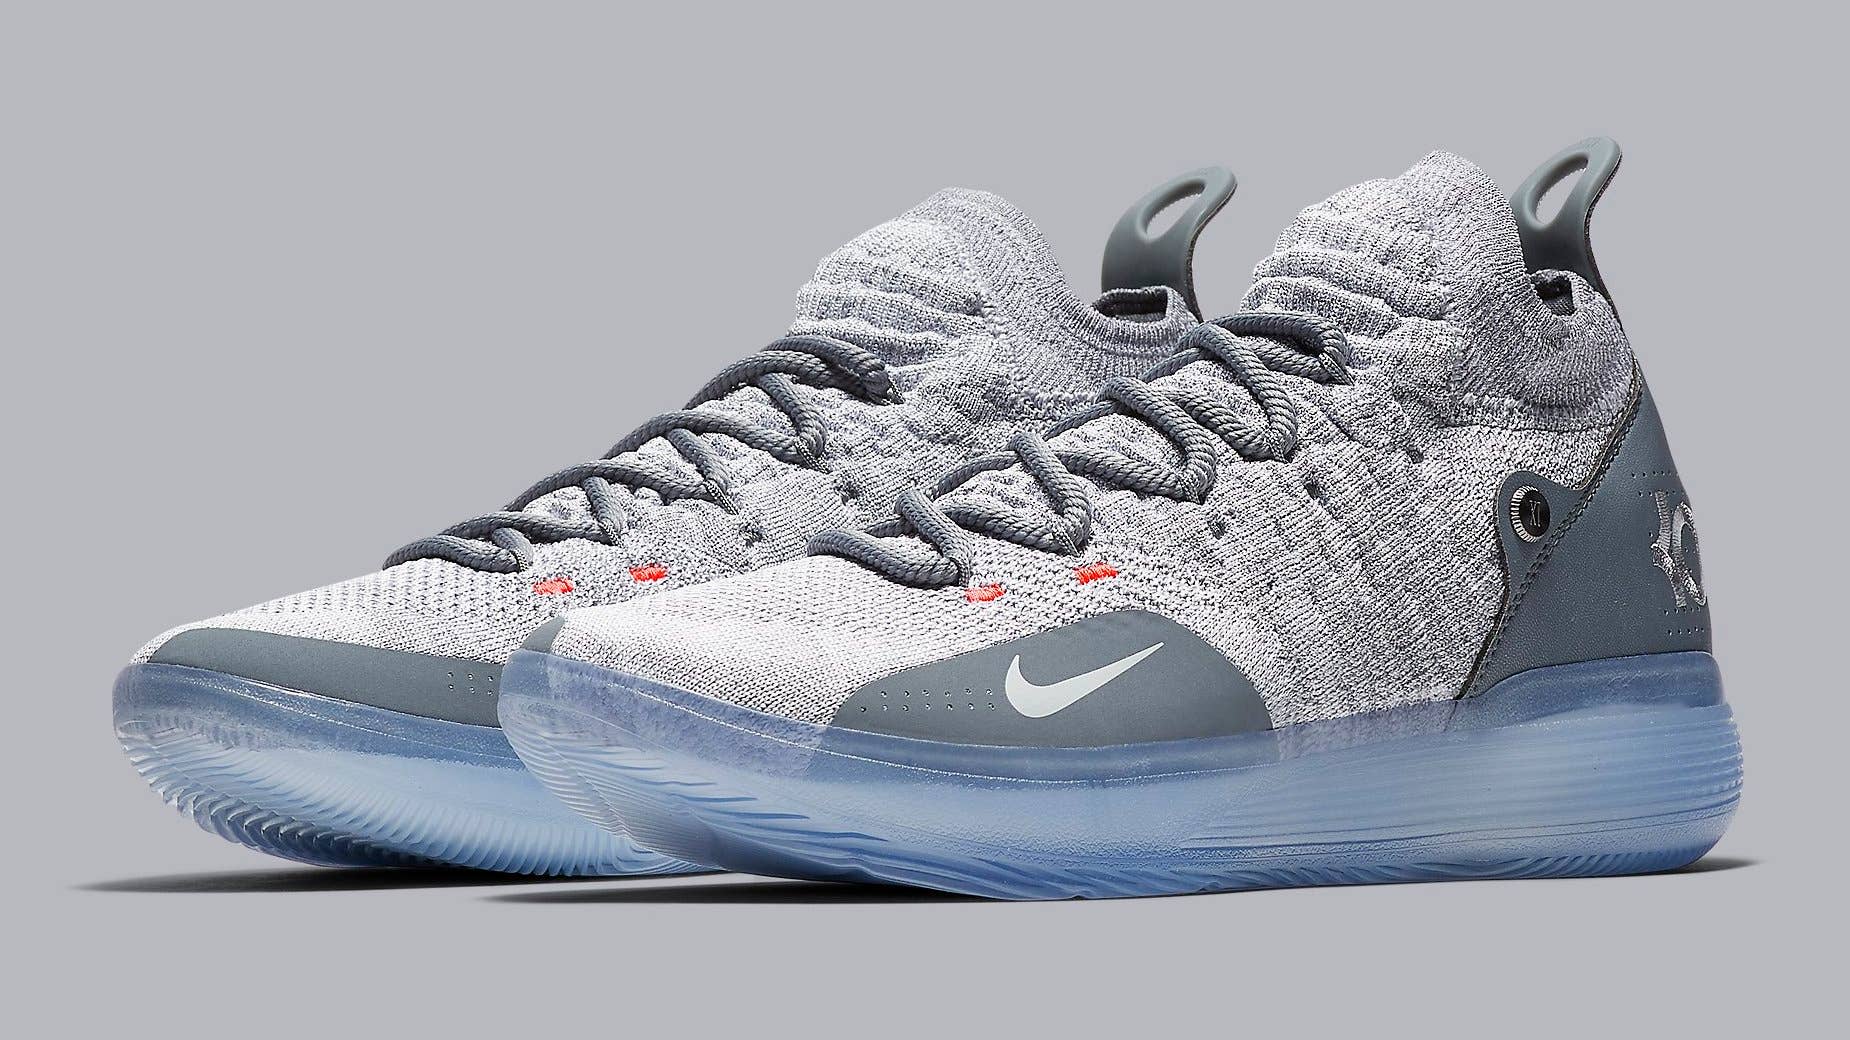 Nike KD 11 Cool Grey Release Date AO2605 002 Pair